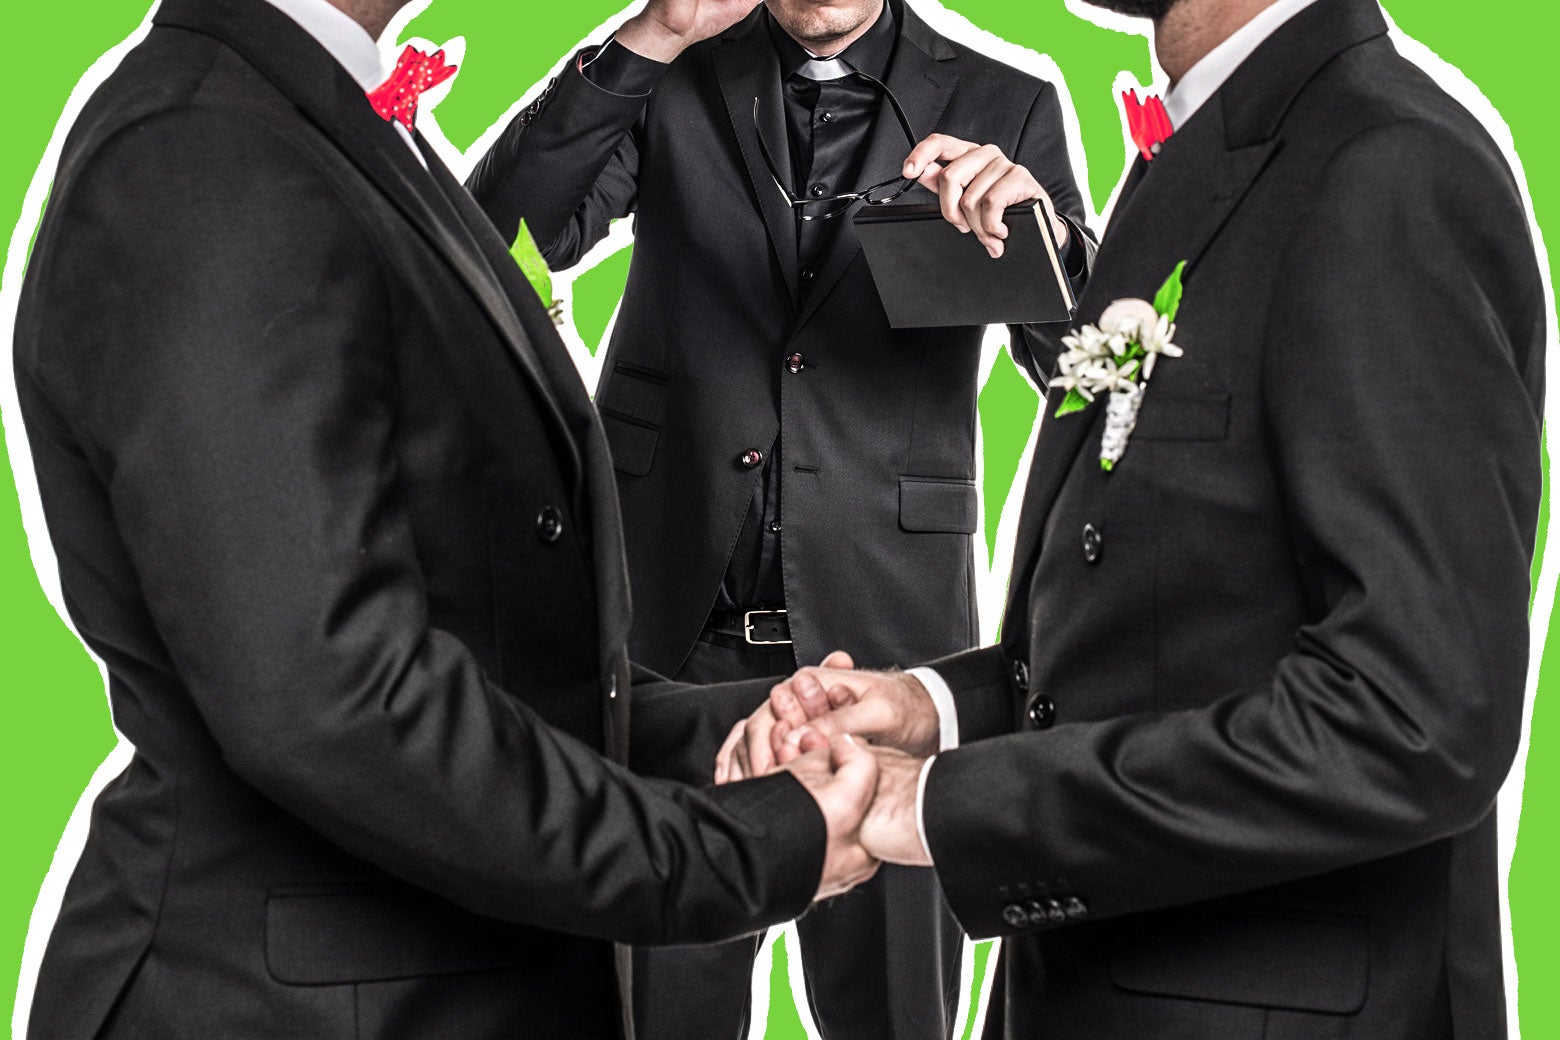 Two men stand to wed while a man officiates the ceremony. Photo illustration by Slate. Photo by Thinkstock.